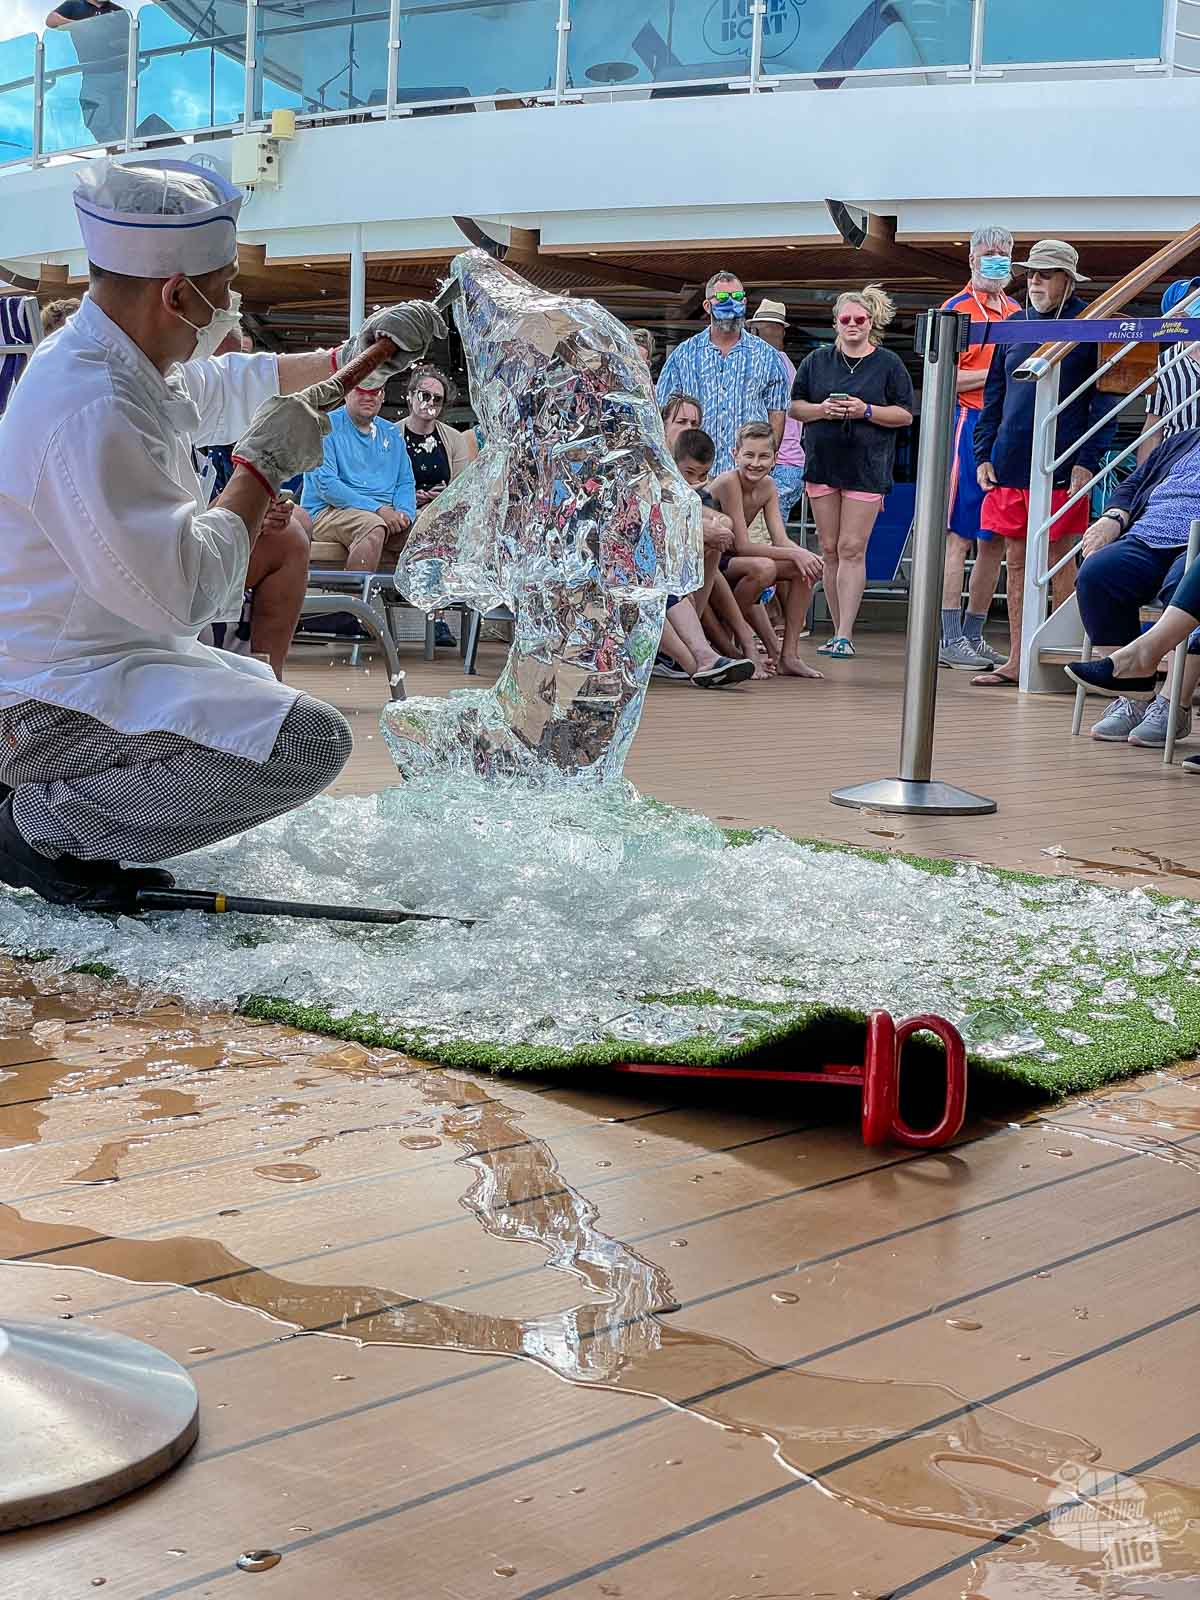 Ice carving demonstration.